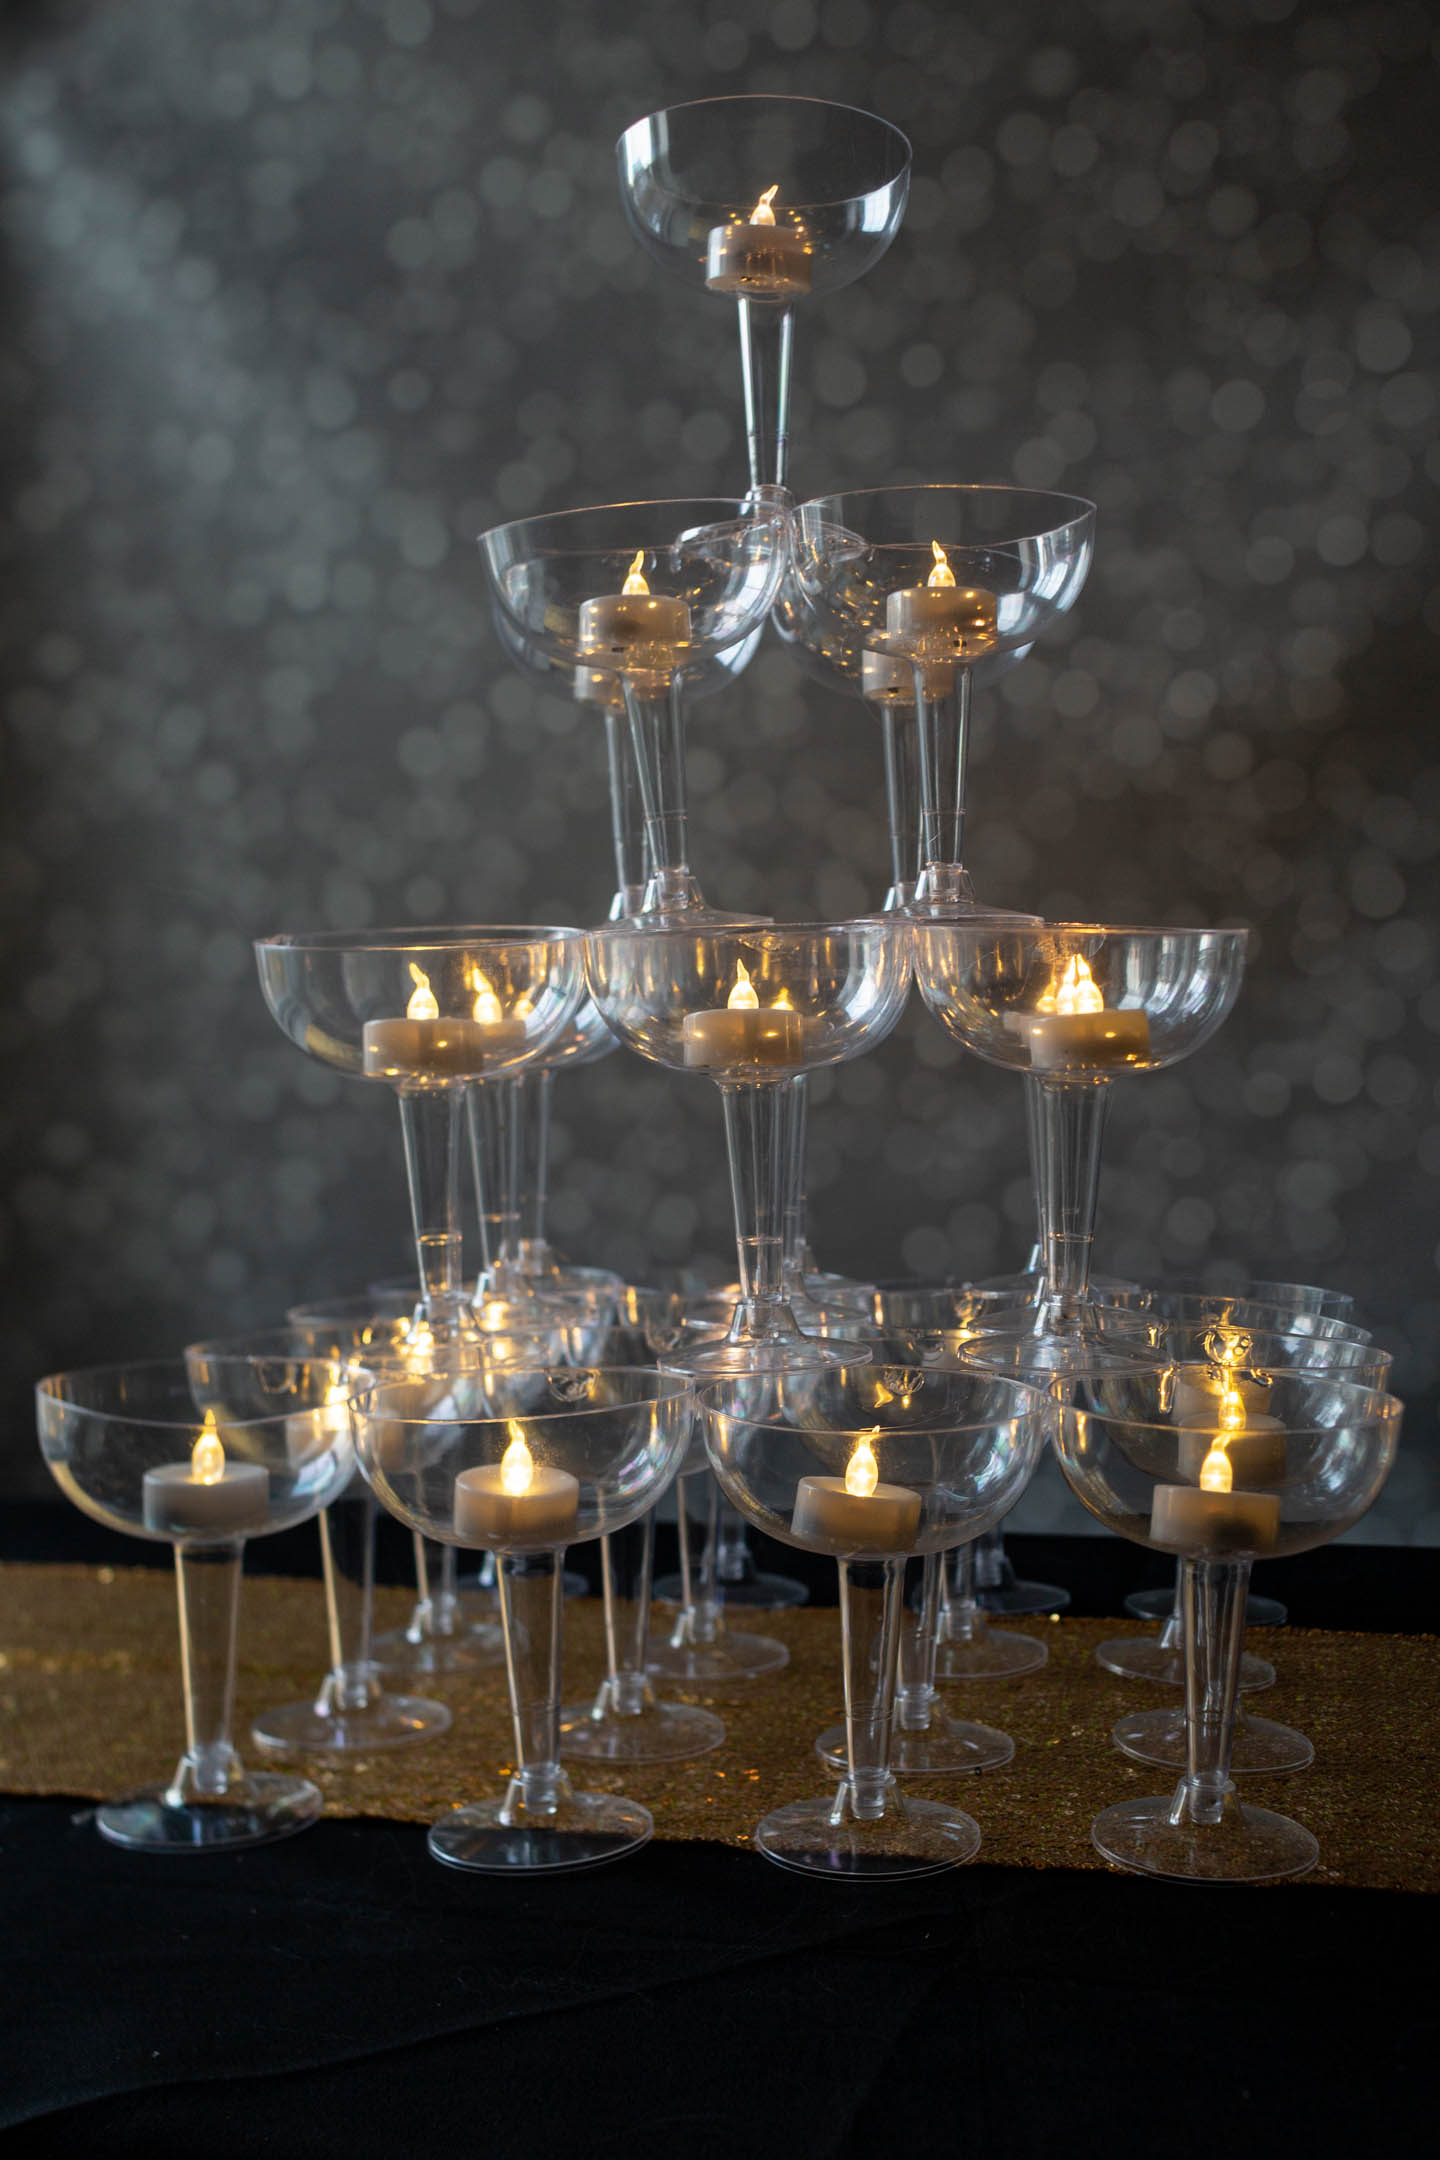 Champagne glass tower with flameless tealight candles for a centerpiece